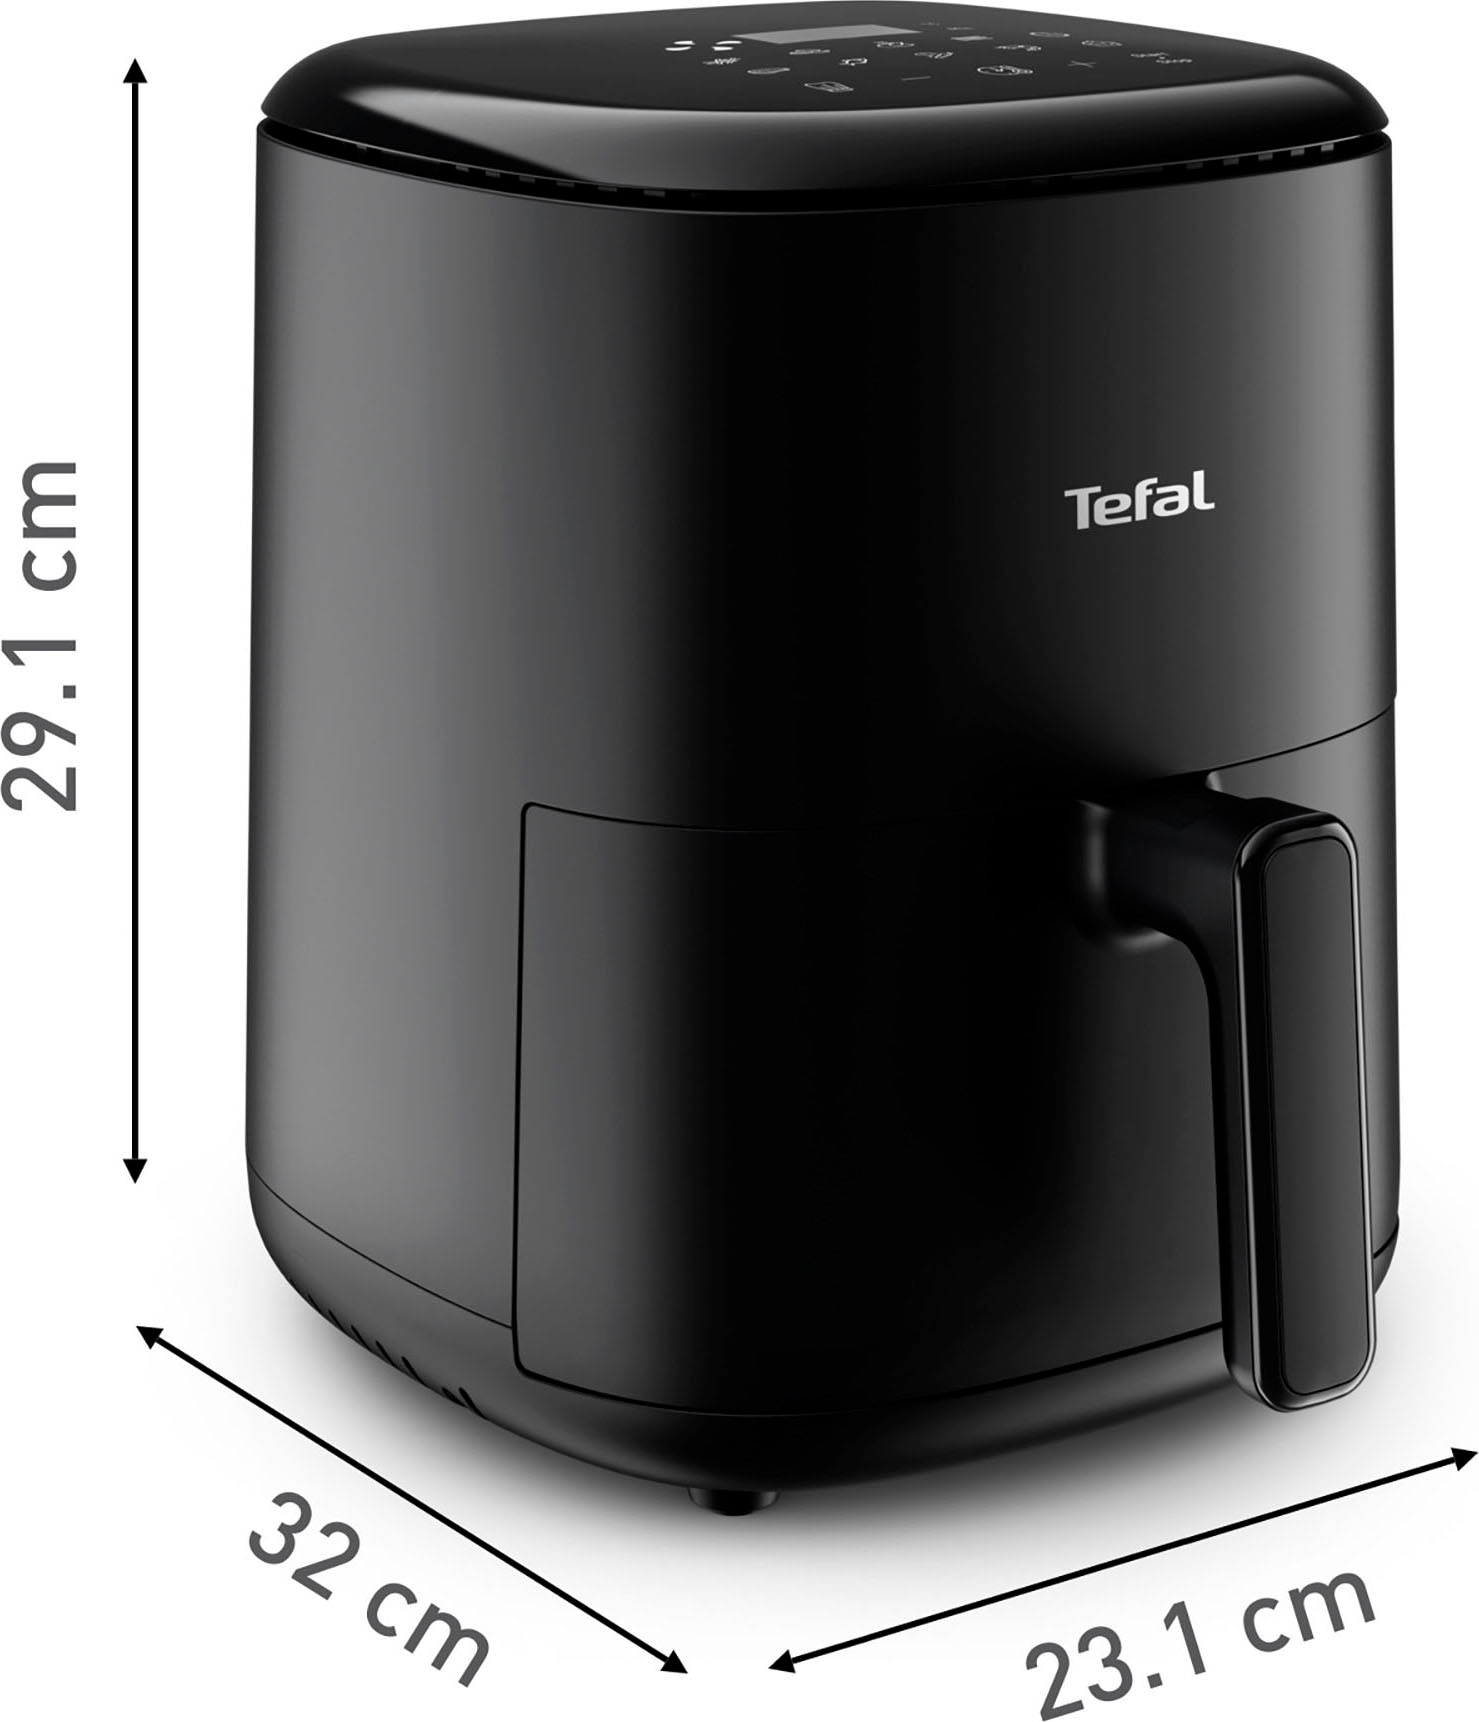 Beliebte Nr. 1 Tefal Heißluftfritteuse »EY1458 Easy Fry im 1300 Shop Online W OTTO Compact«